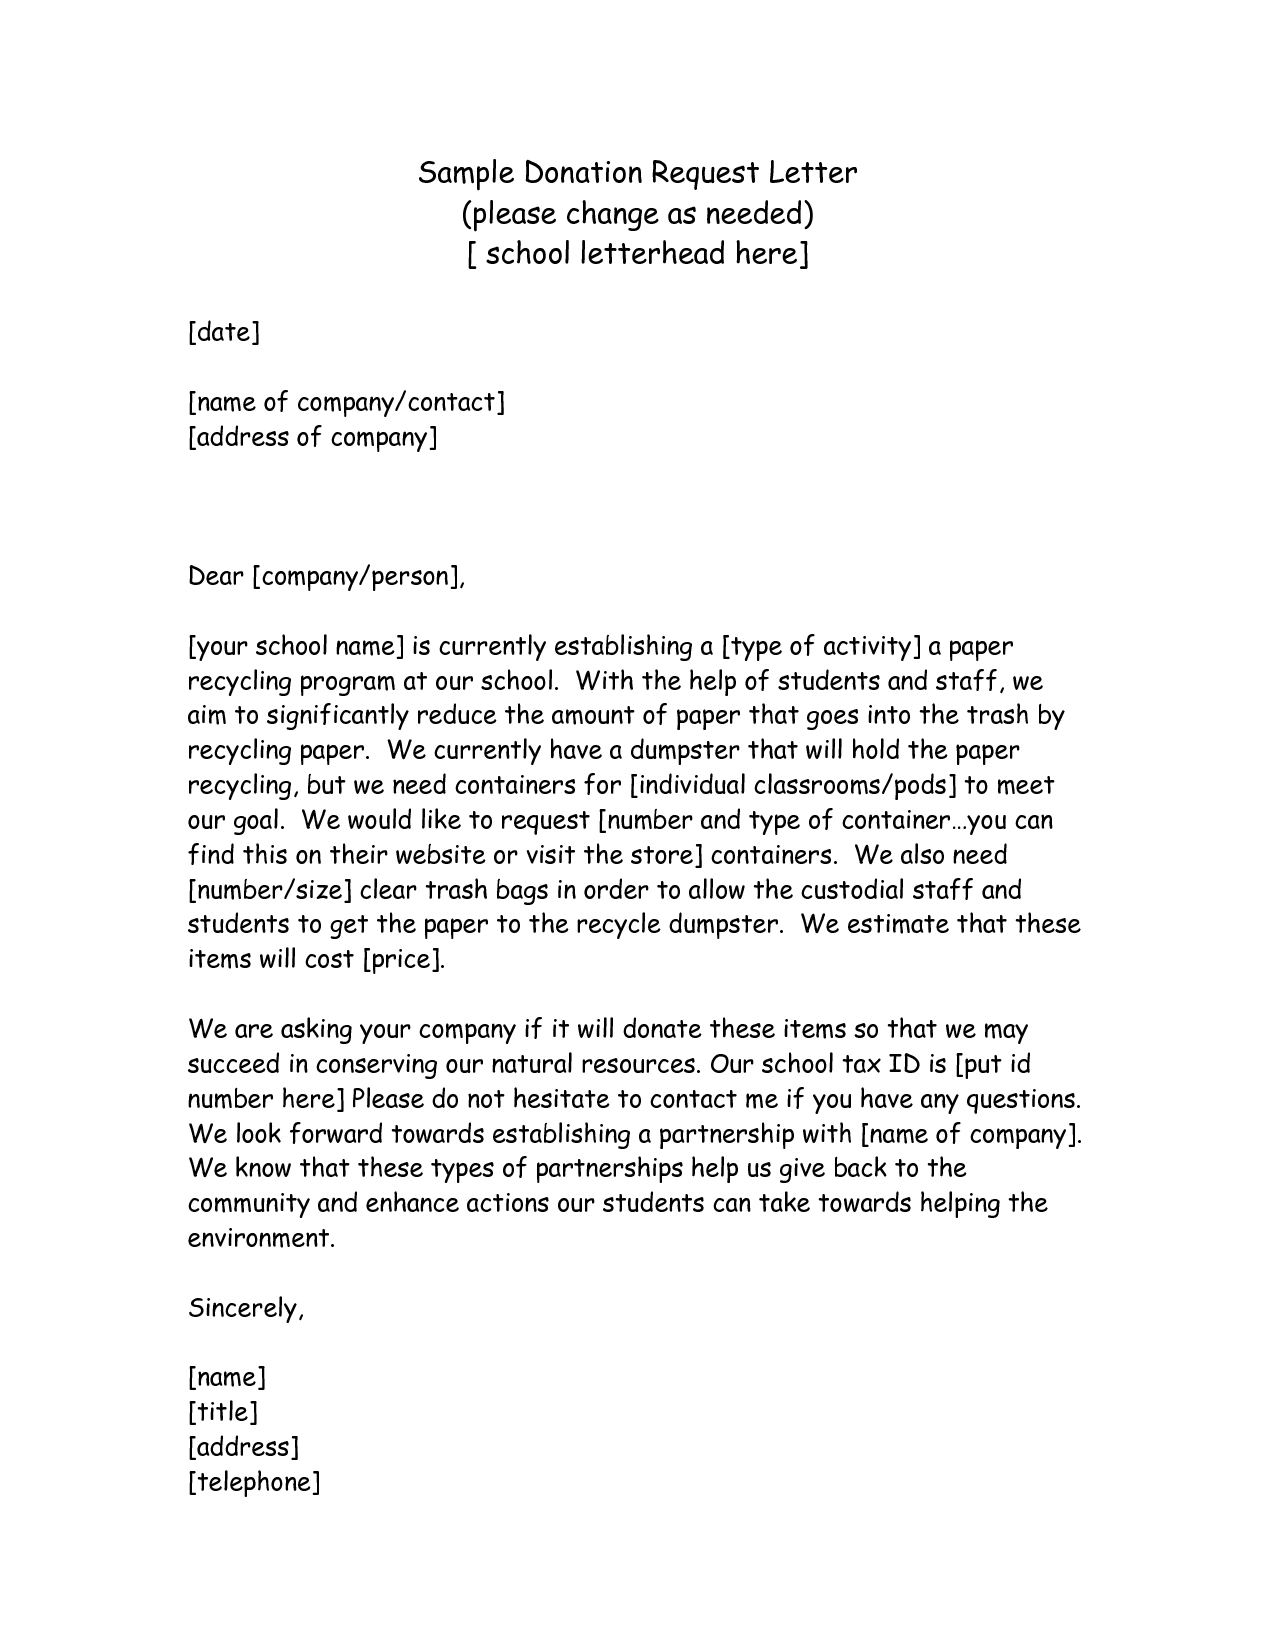 Sponsorship Letter Template for Donations - Examples for Donation Letters